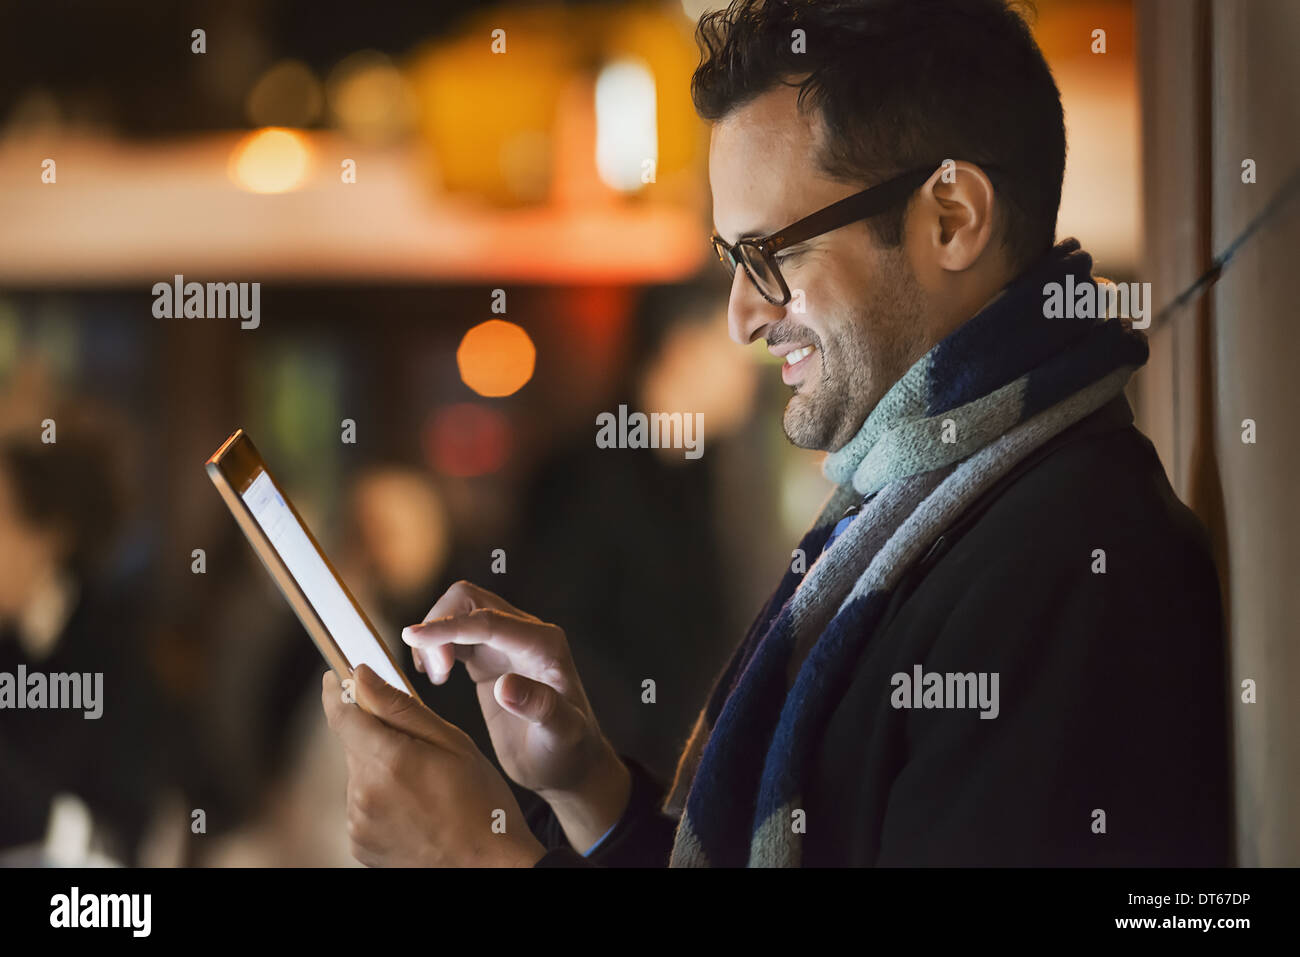 A man in a city at night, looking at a computer tablet. Stock Photo